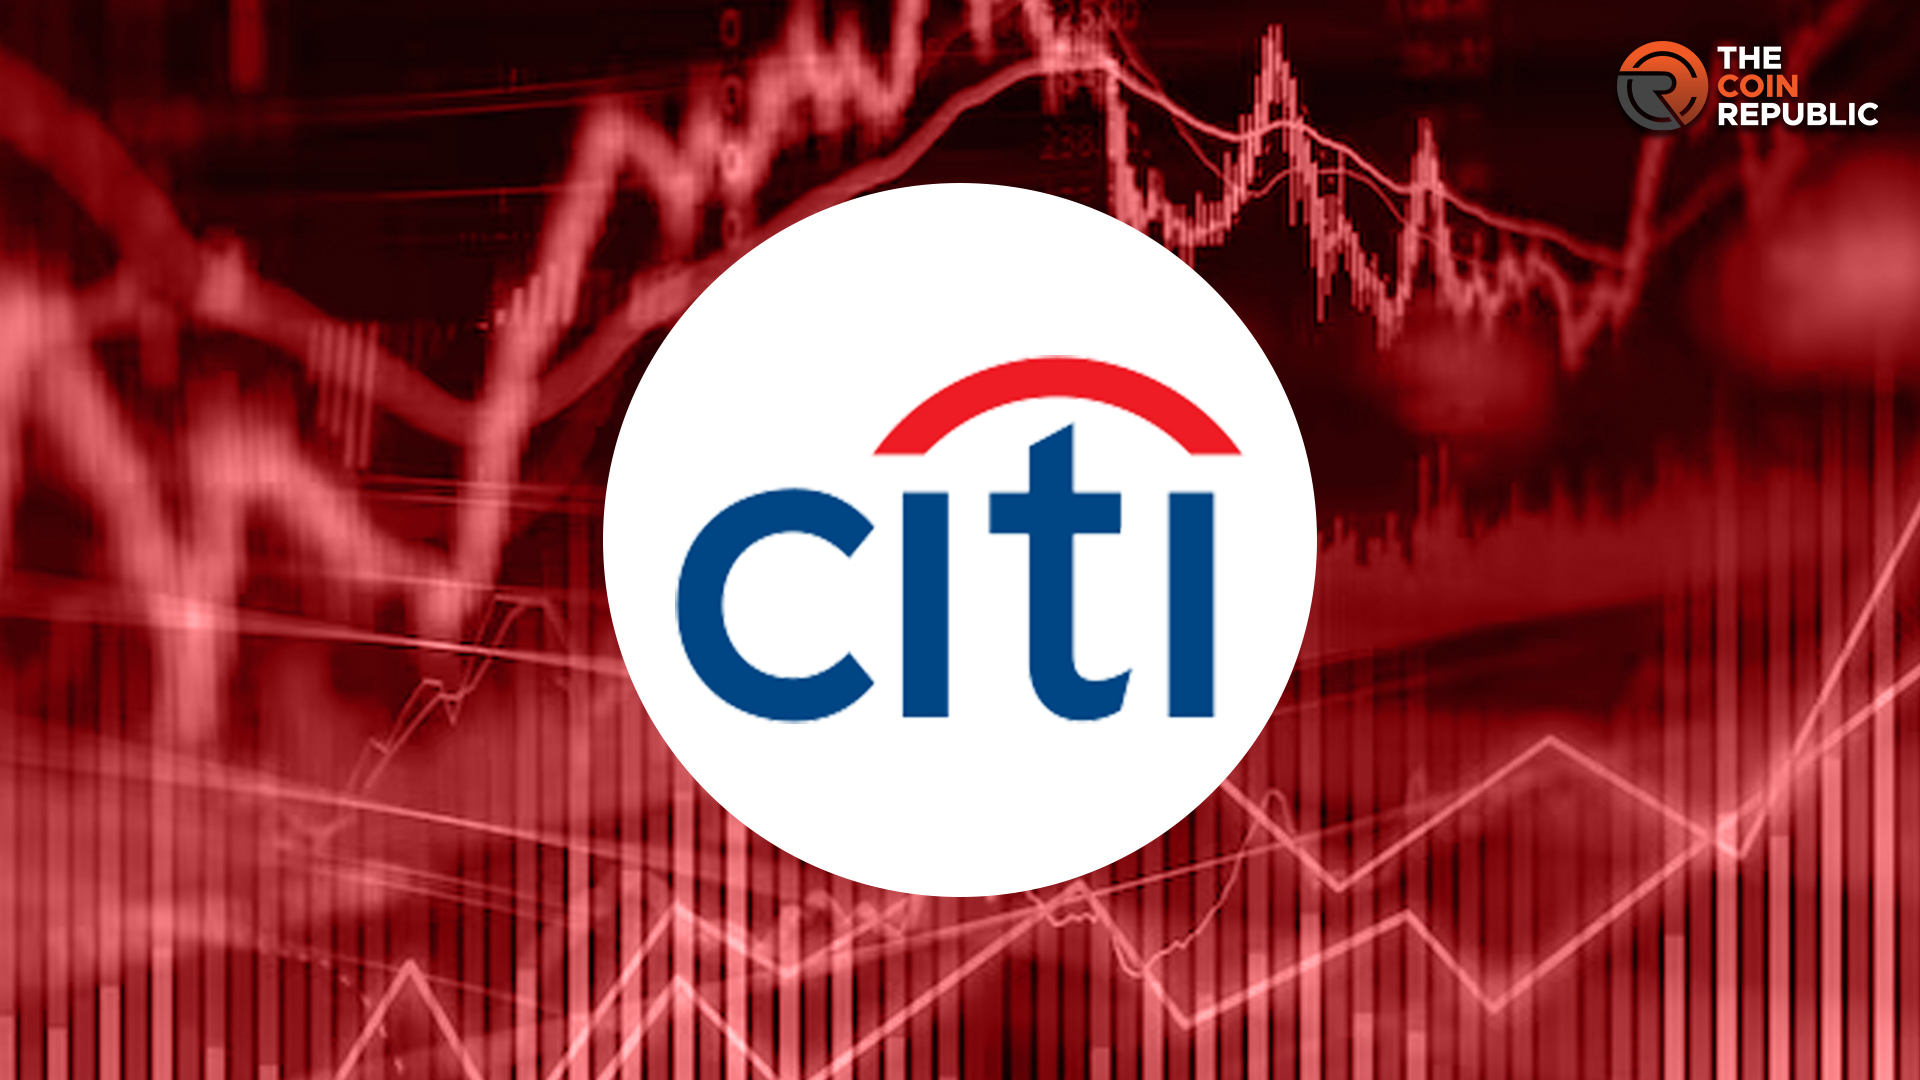 CitiGroup Stock Price Analysis: Bulls In Trouble, More Dip Ahead?